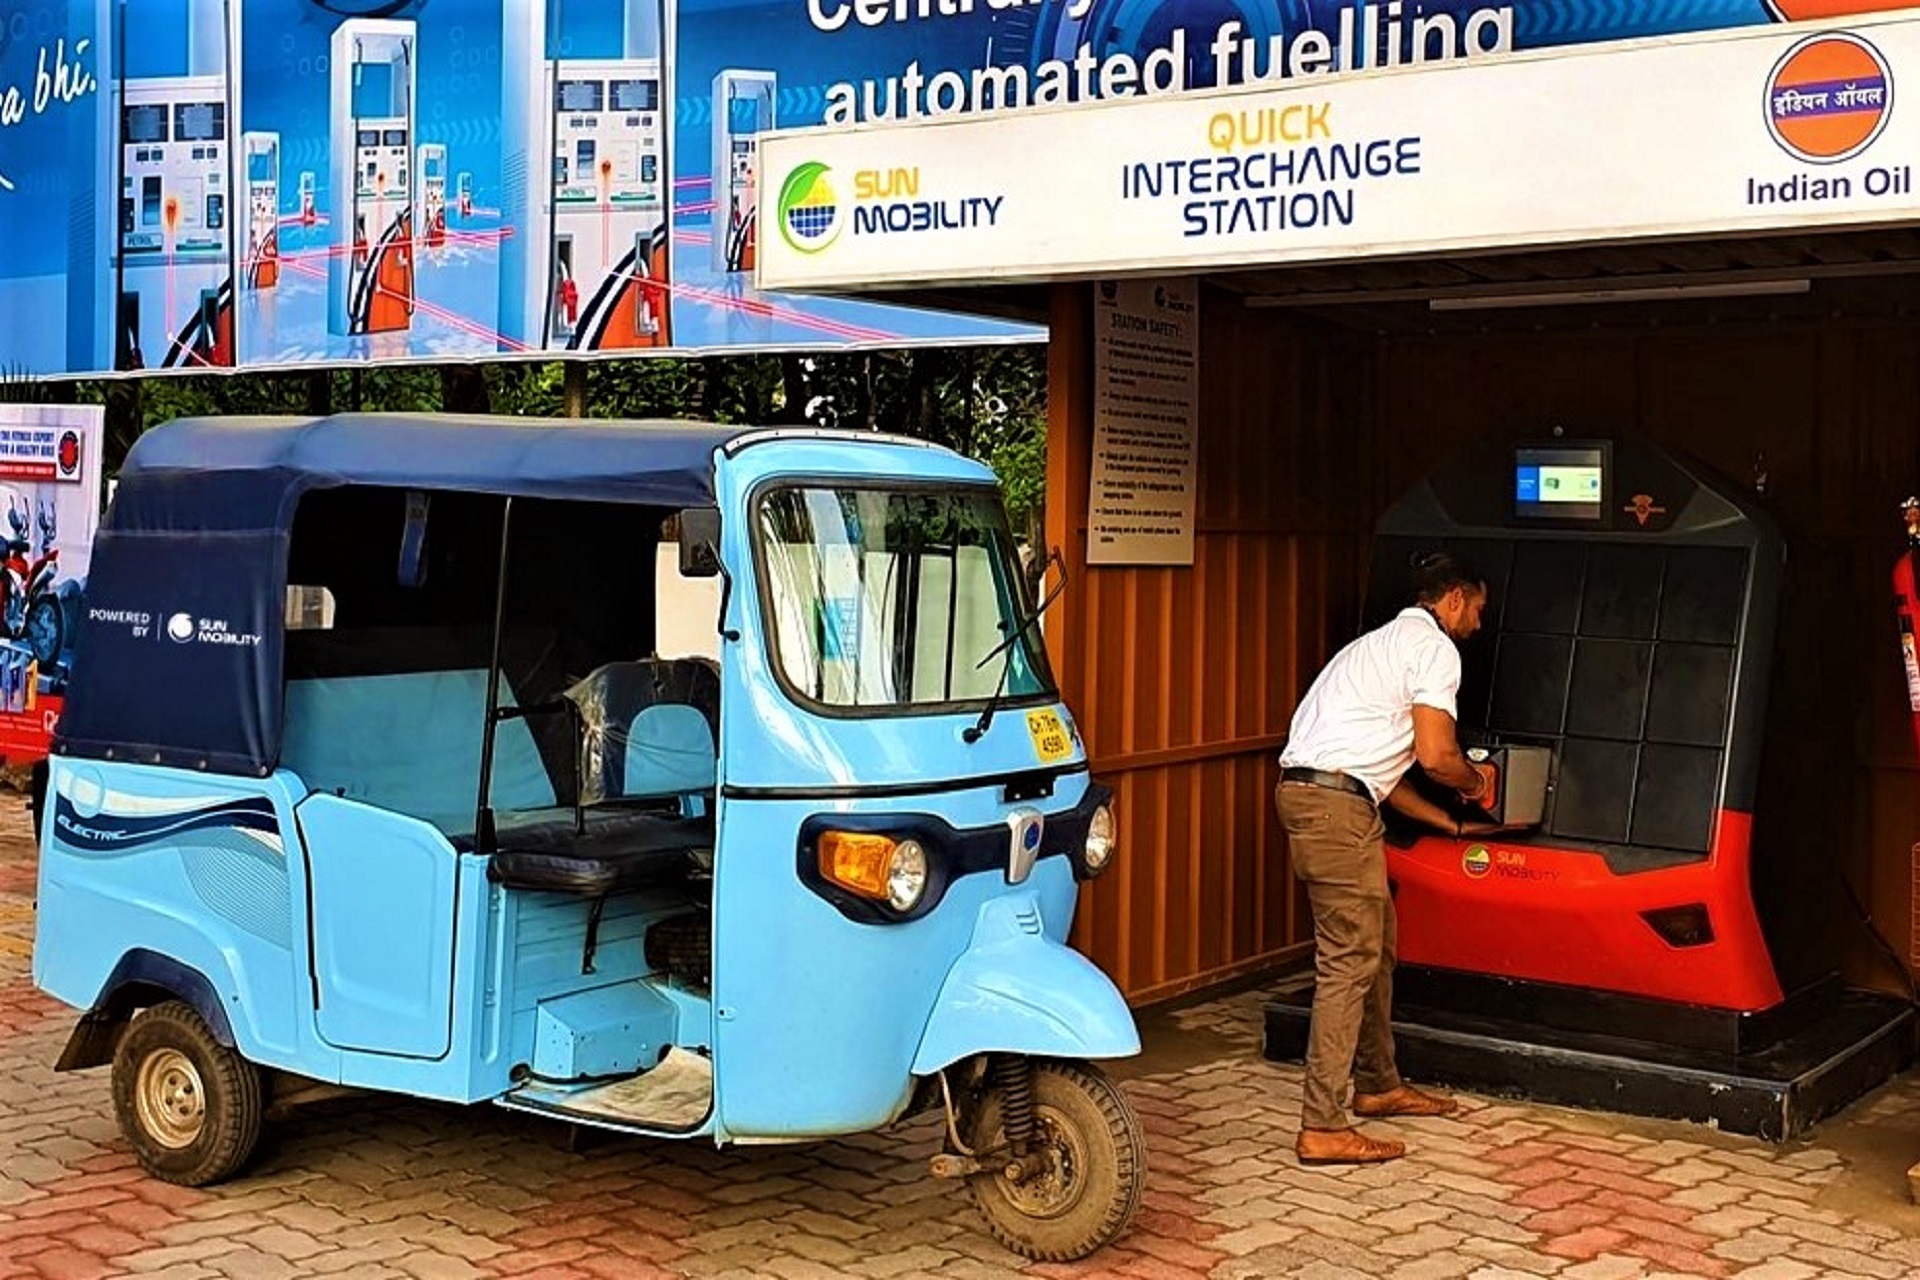 Sun Mobility Raises ₹373 Crores Fund From Vitol For EV Energy Infrastructure